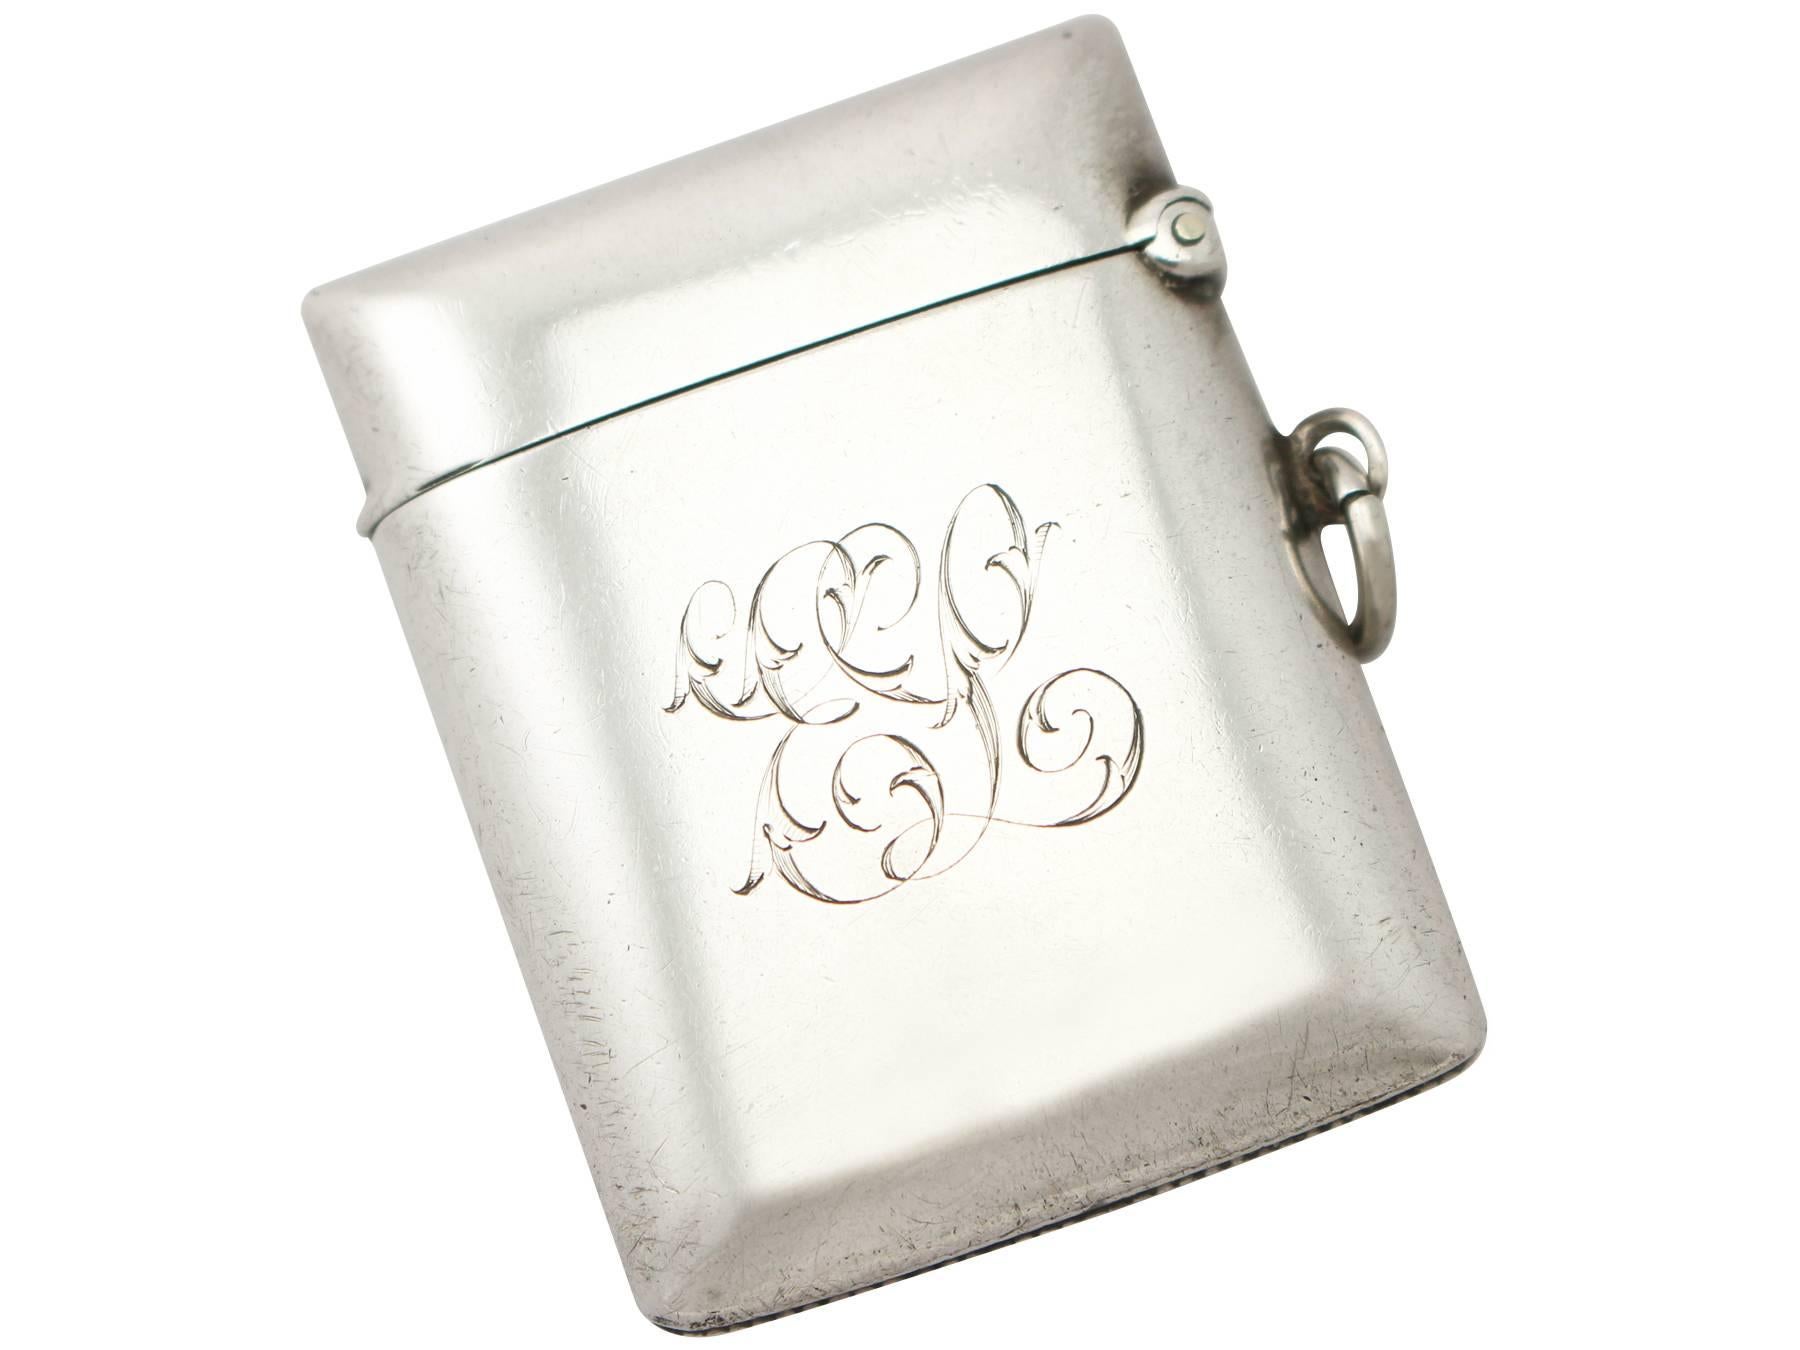 A very good antique Victorian sterling silver and enamel vesta case; an addition to our equestrian silverware collection.

This antique Victorian sterling silver vesta case has a plain rectangular rounded form.

The anterior surface is